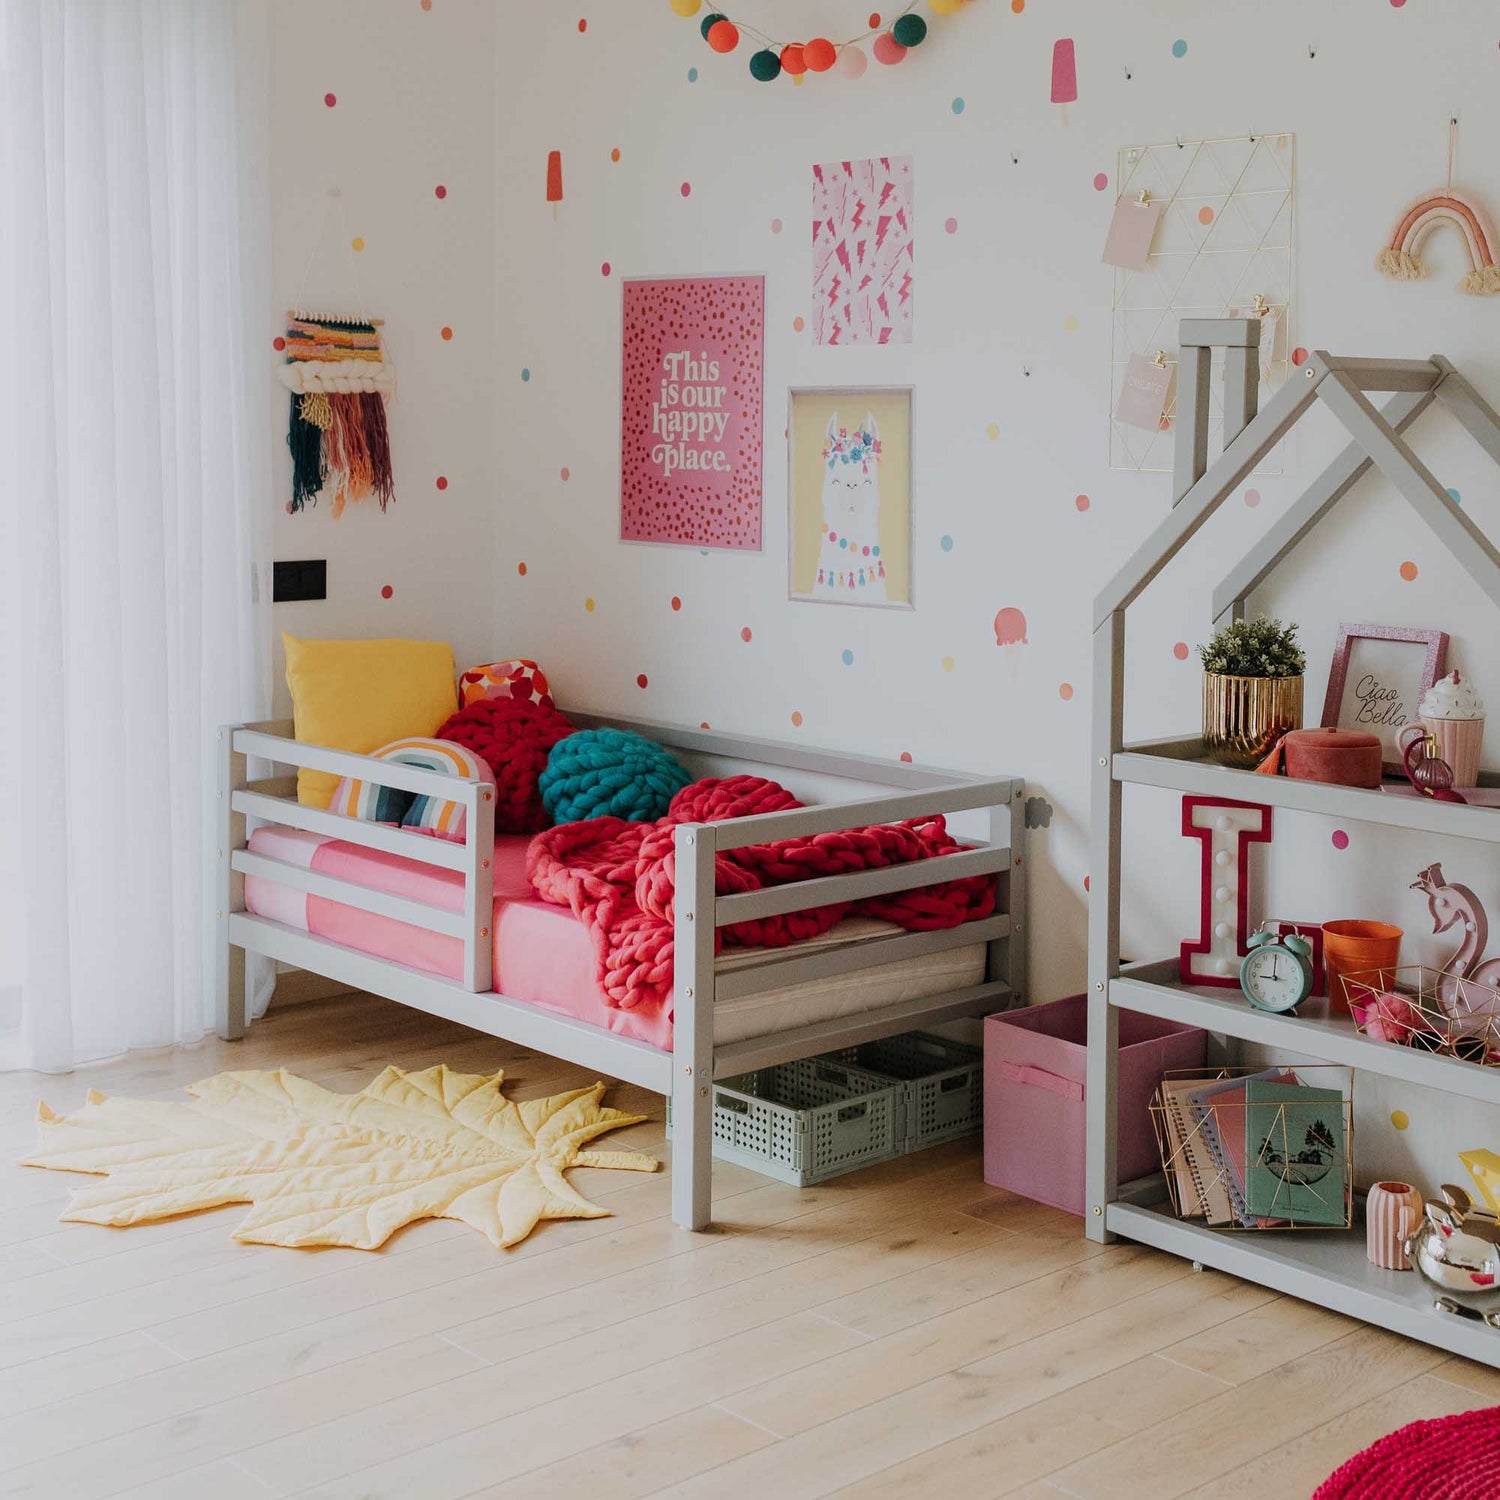 A girl's room with a Sweet Home From Wood kids' bed on legs with a horizontal rail fence and a colorful rug.